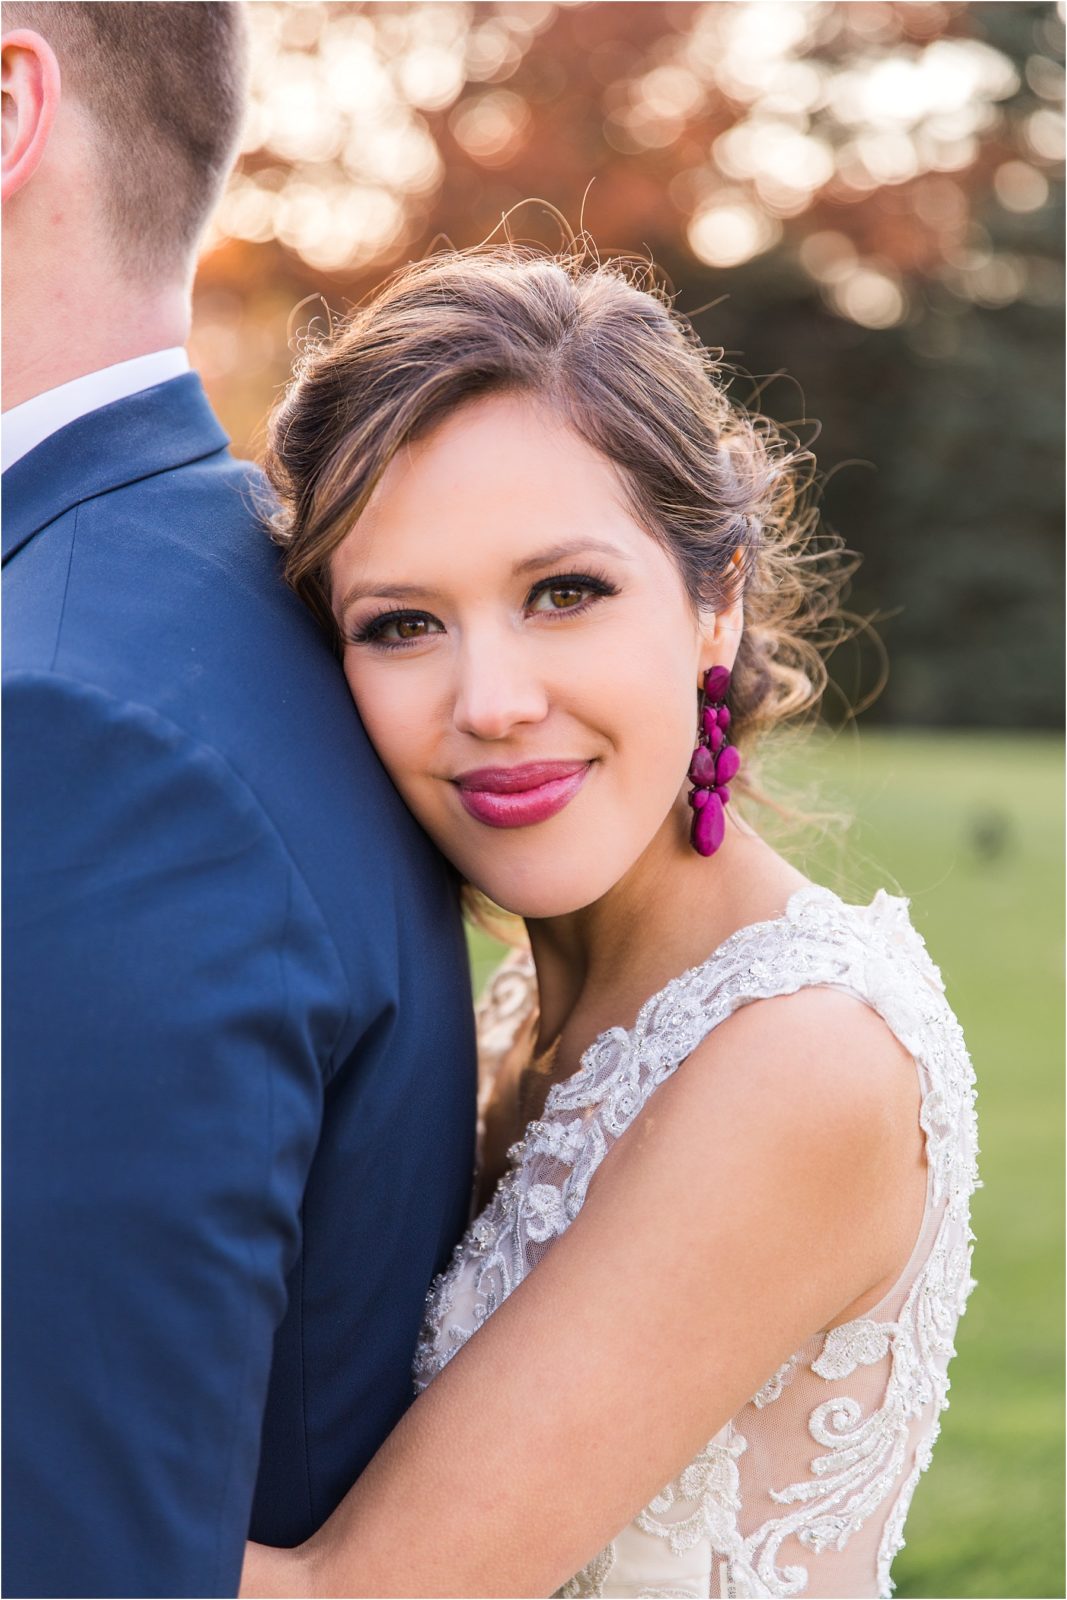 Burgundy Fall Wedding in Milwaukee, WI | Happy Takes Photography 